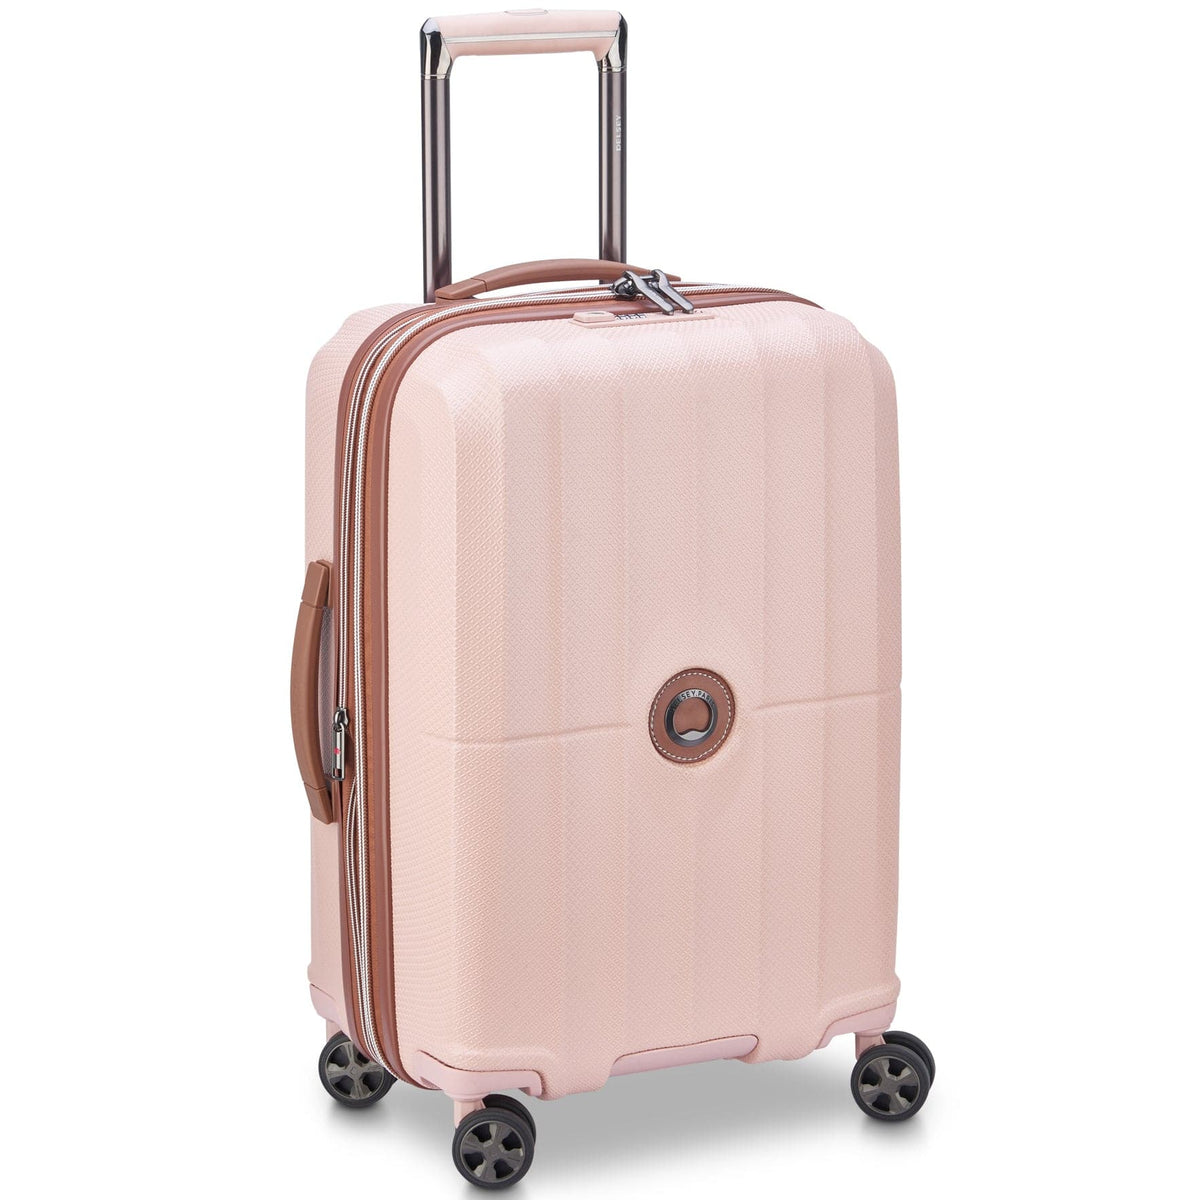 Delsey ST. Tropez Carry-On - 21" Small